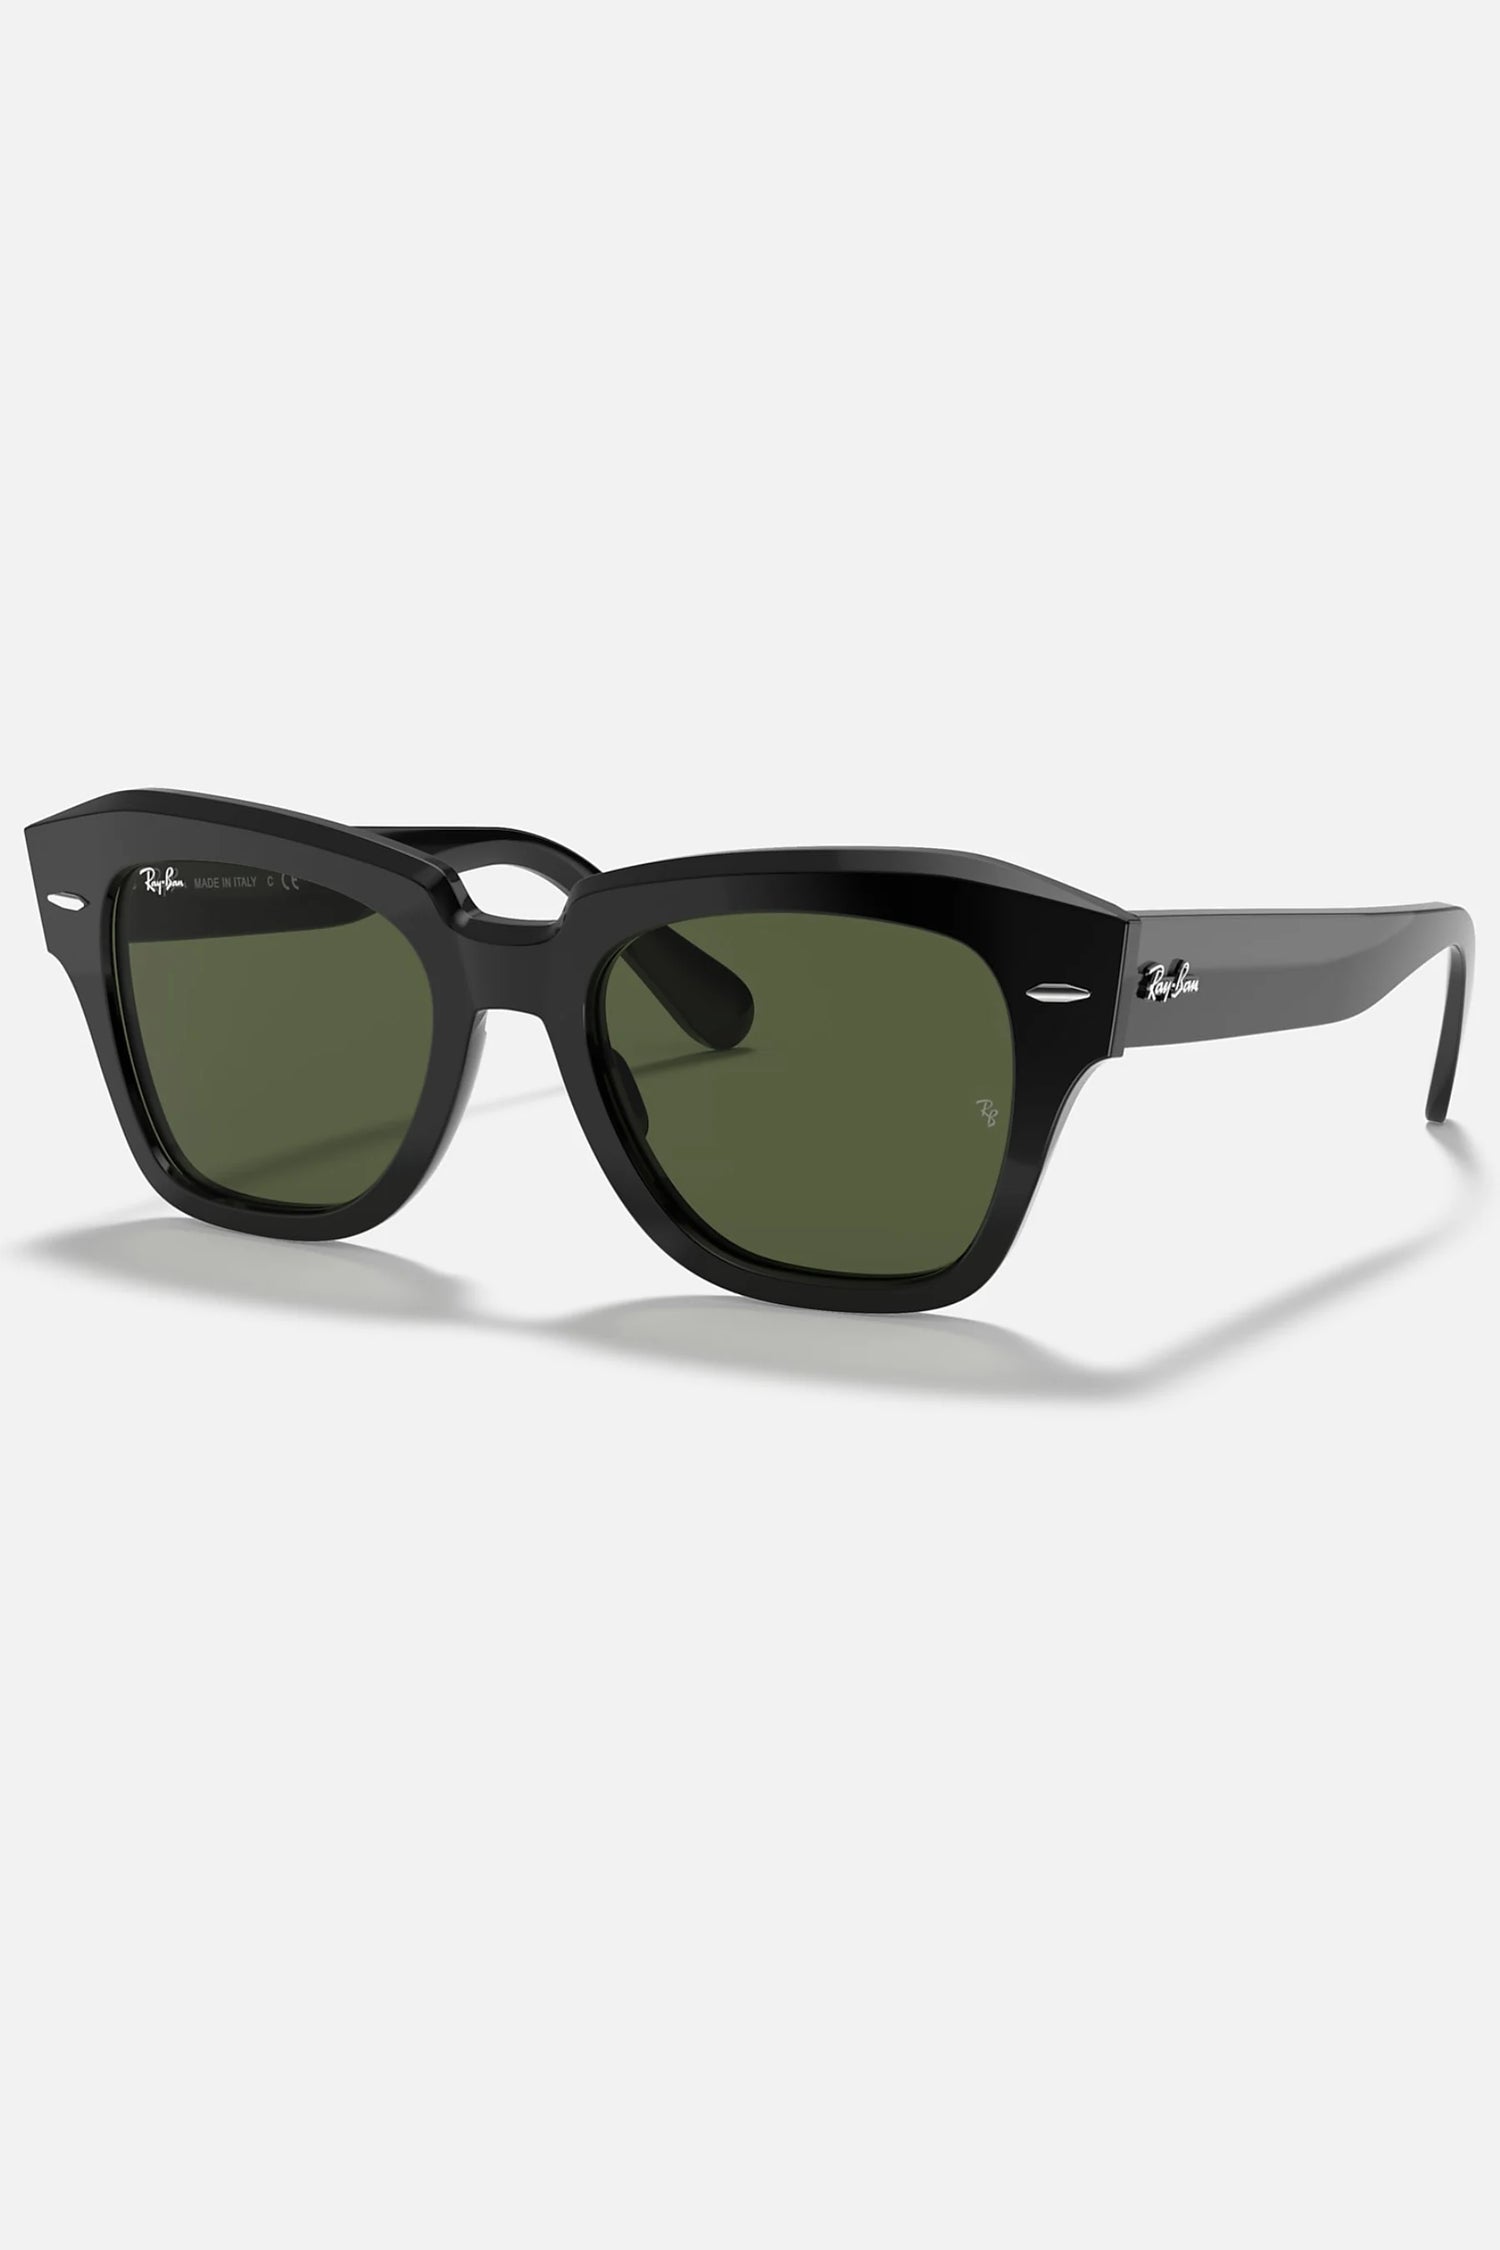 Ray-Ban RB2186 901/31 State Street